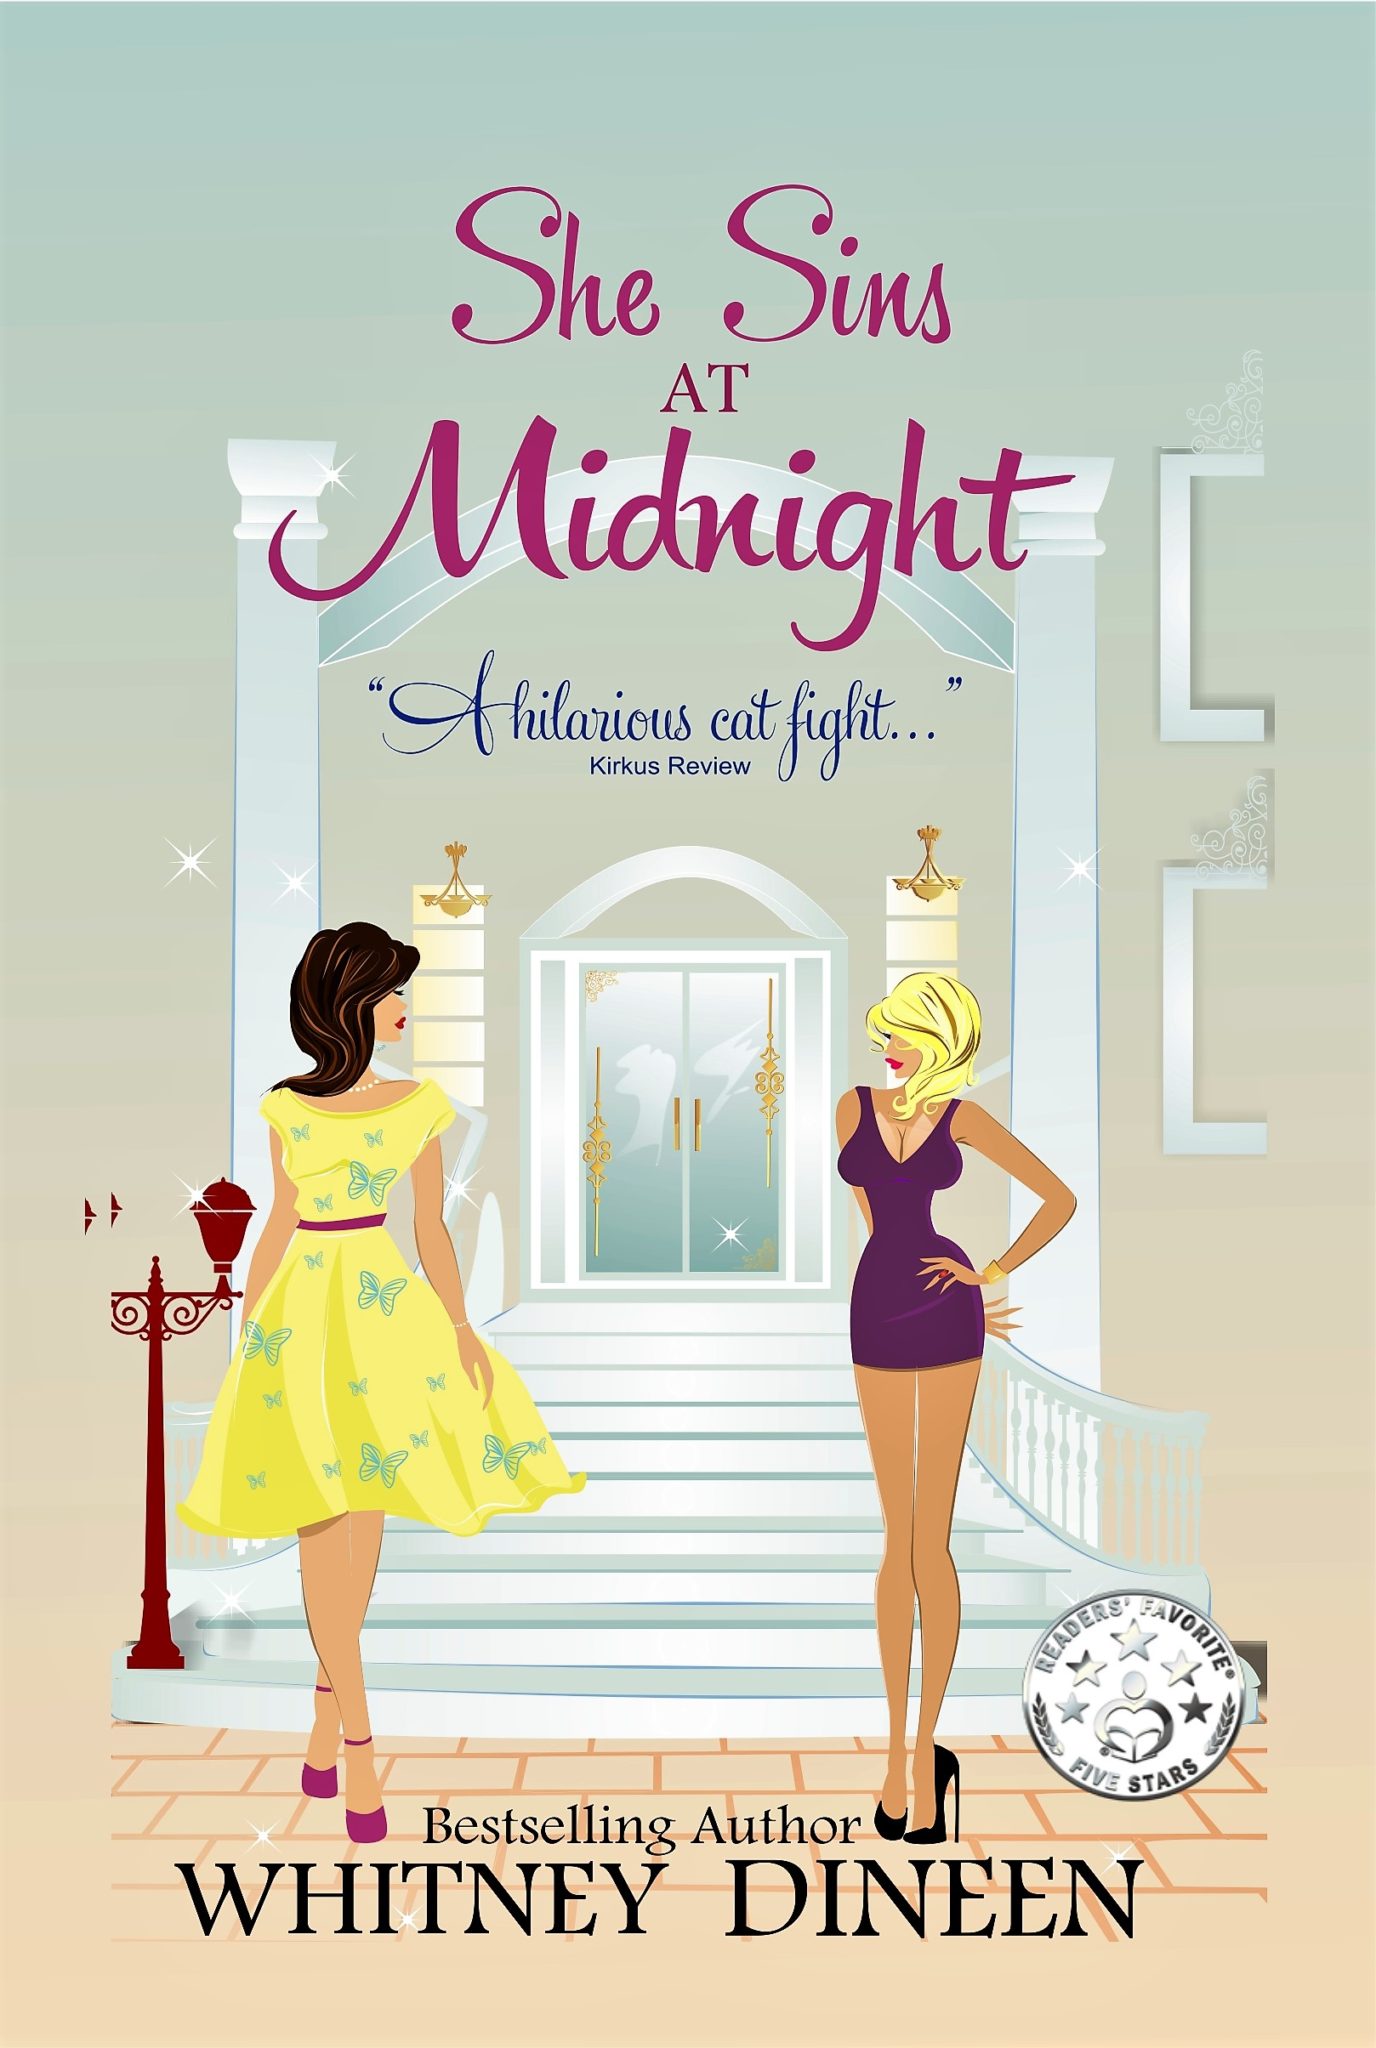 FREE: She Sins at Midnight by Whitney Dineen